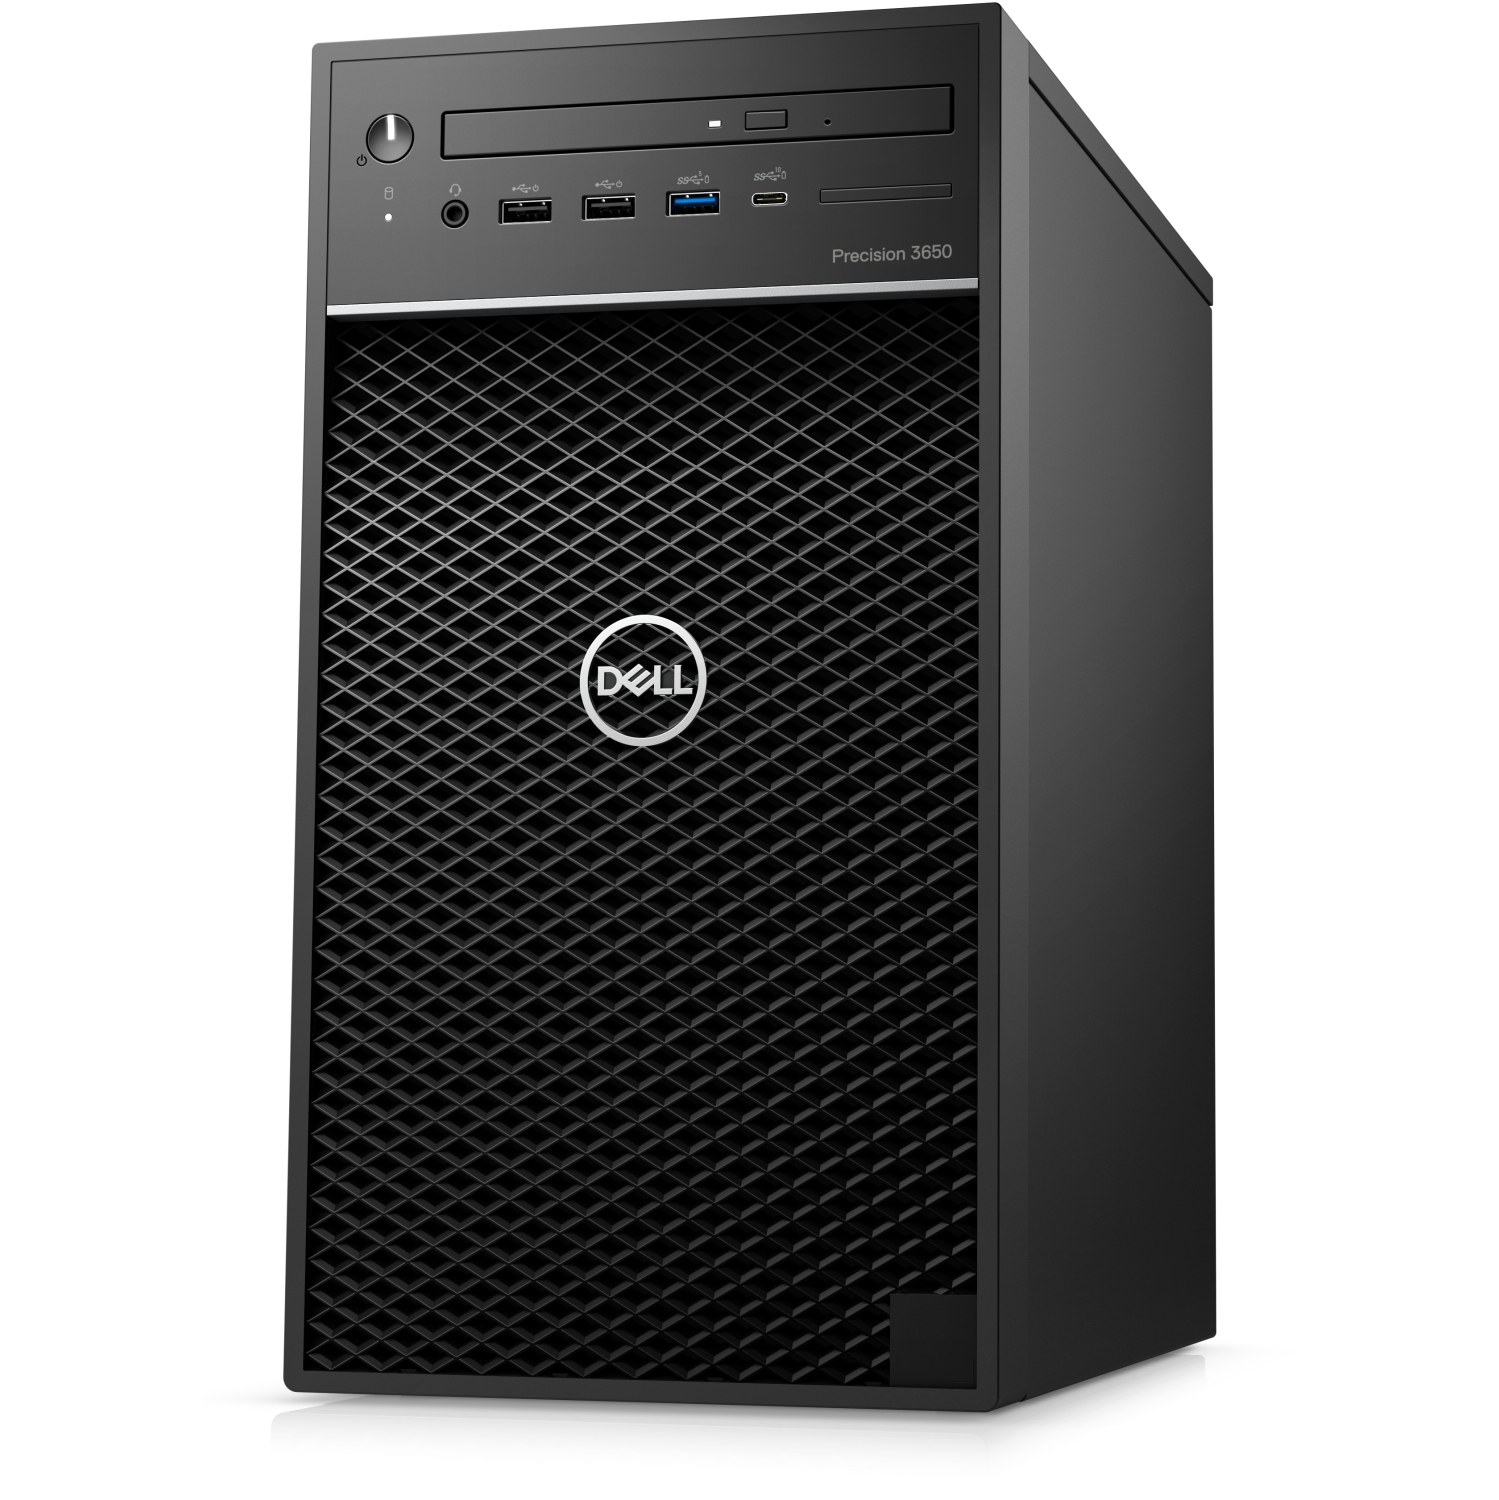 Refurbished (Excellent) - Dell Precision T3650 Workstation Desktop (2021), Core i9, 1TB SSD + 256GB SSD, 32GB RAM, RTX 5000, 8 Cores @ 4.9 GHz, 11th Gen CPU Certified